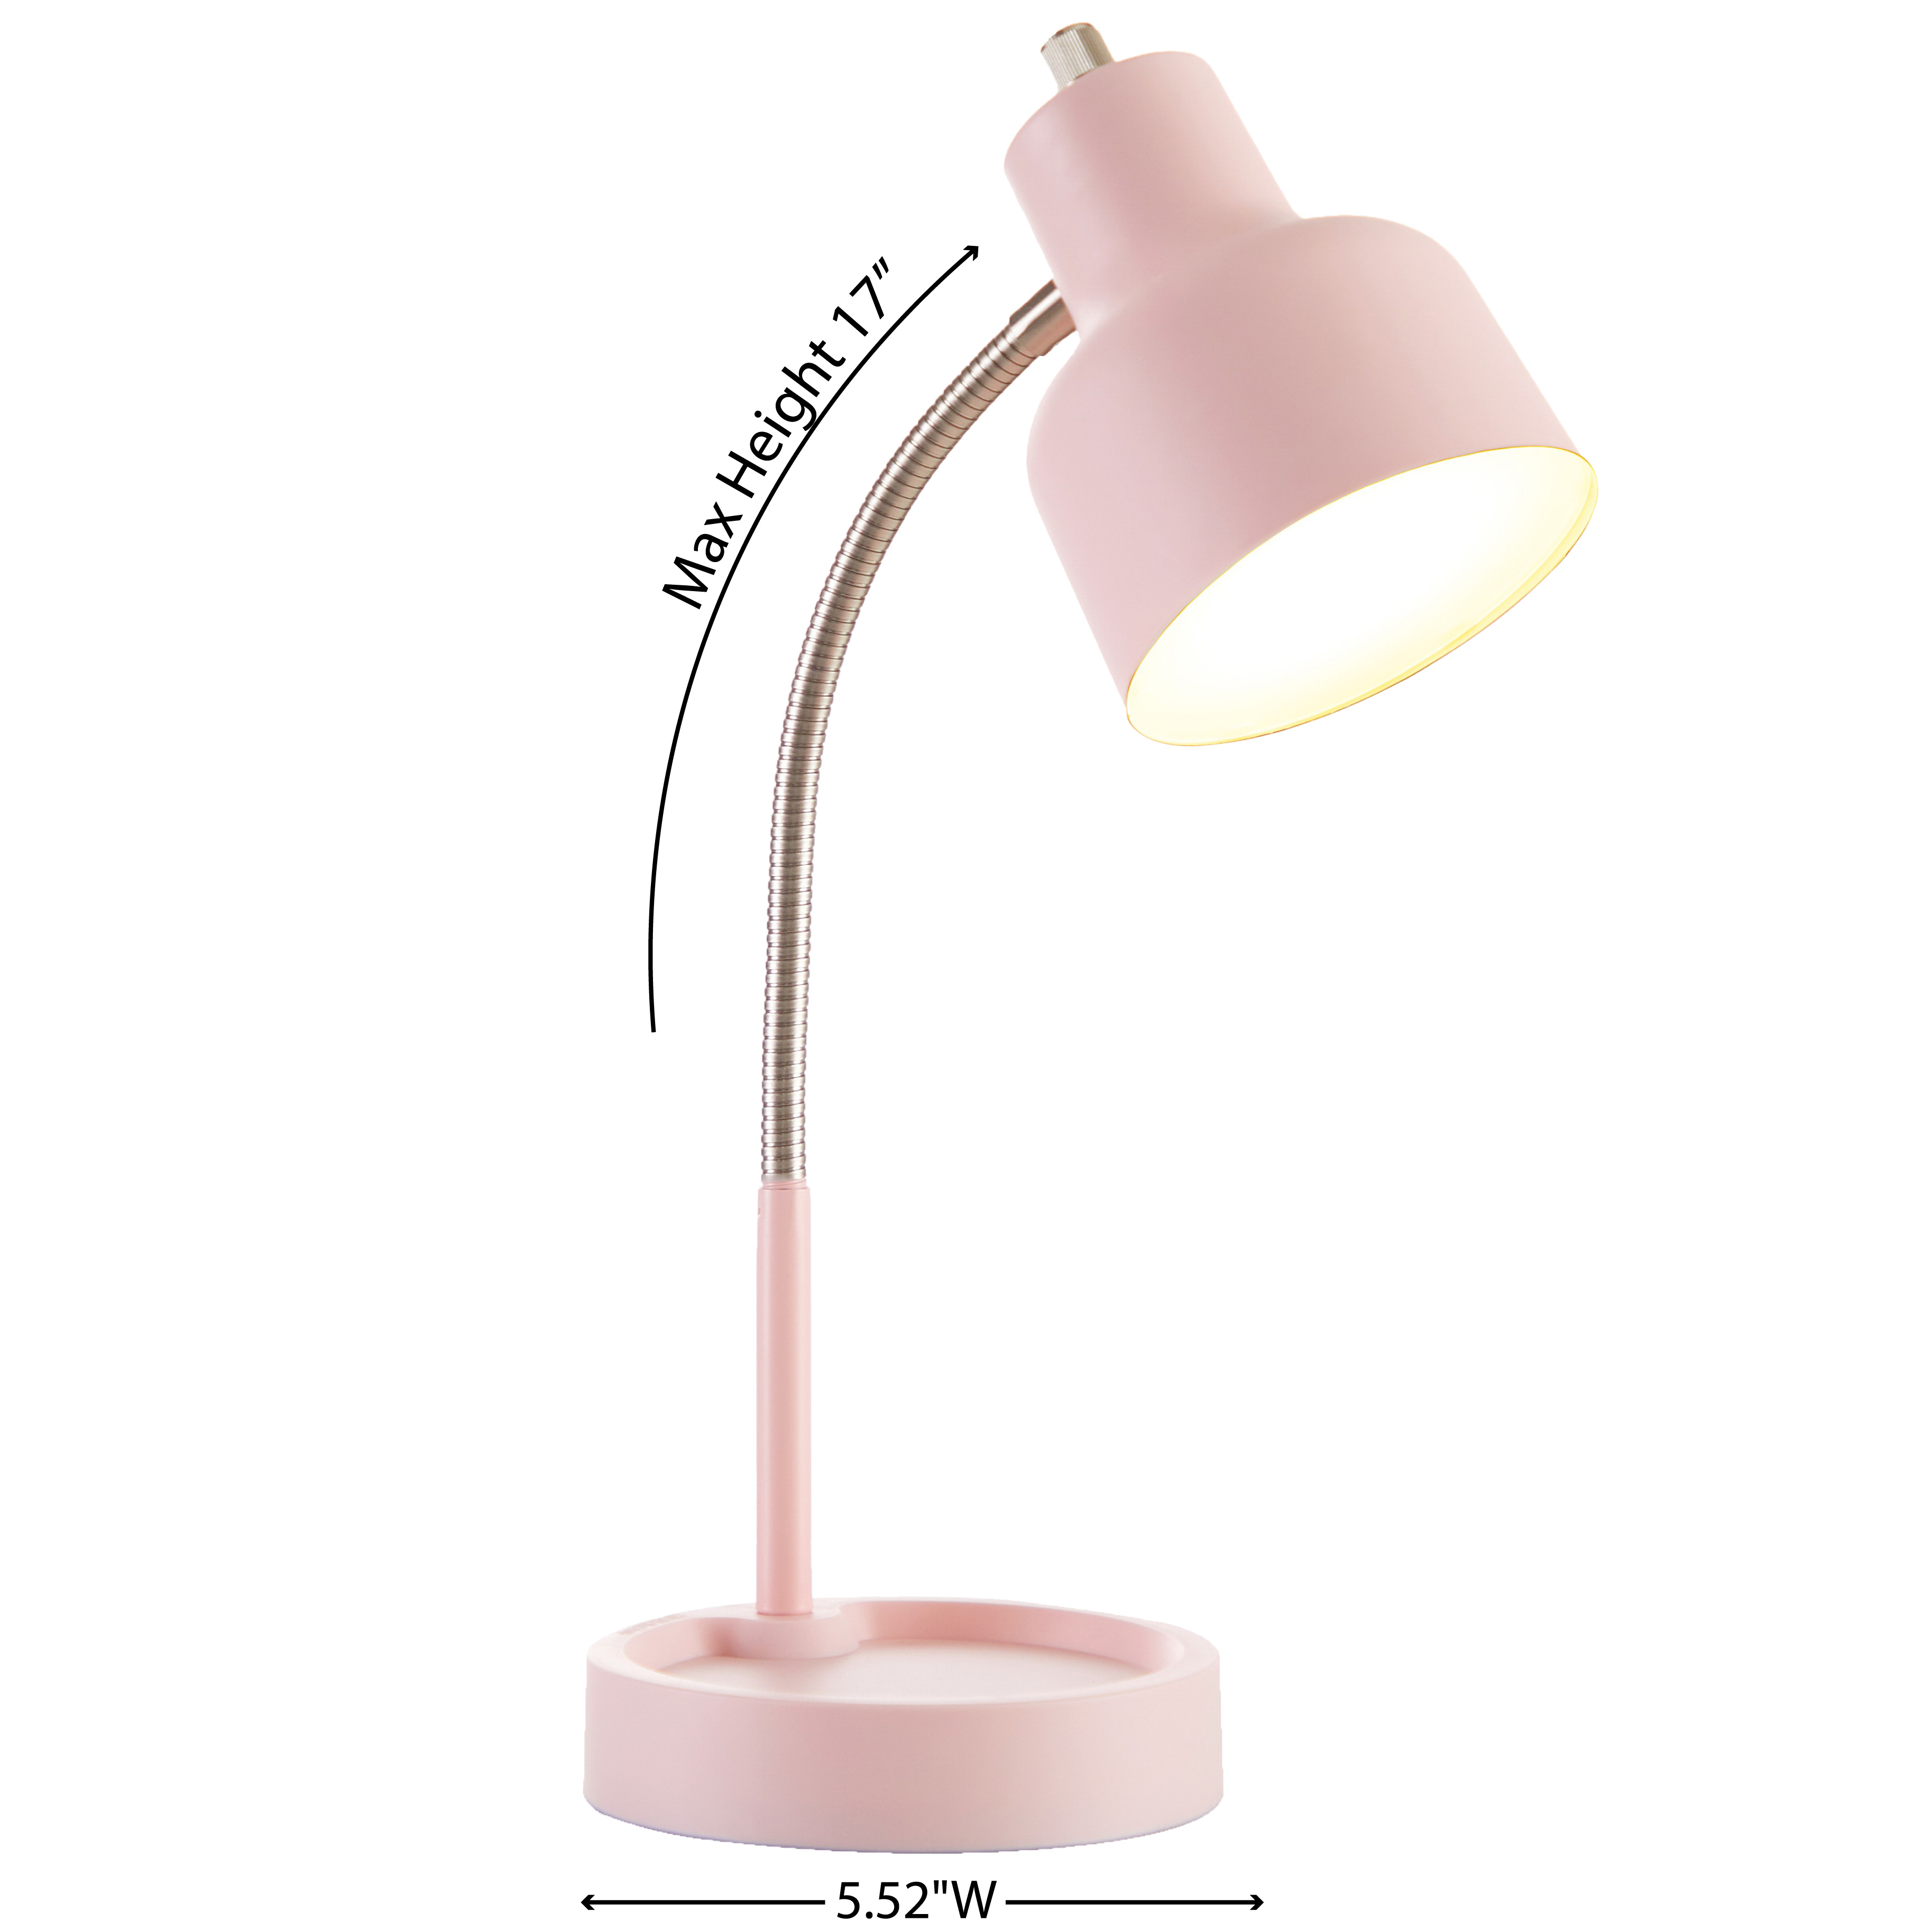 Mainstays LED Desk Lamp with Catch-All Base & AC Outlet, Matte Blush Pink - image 3 of 10